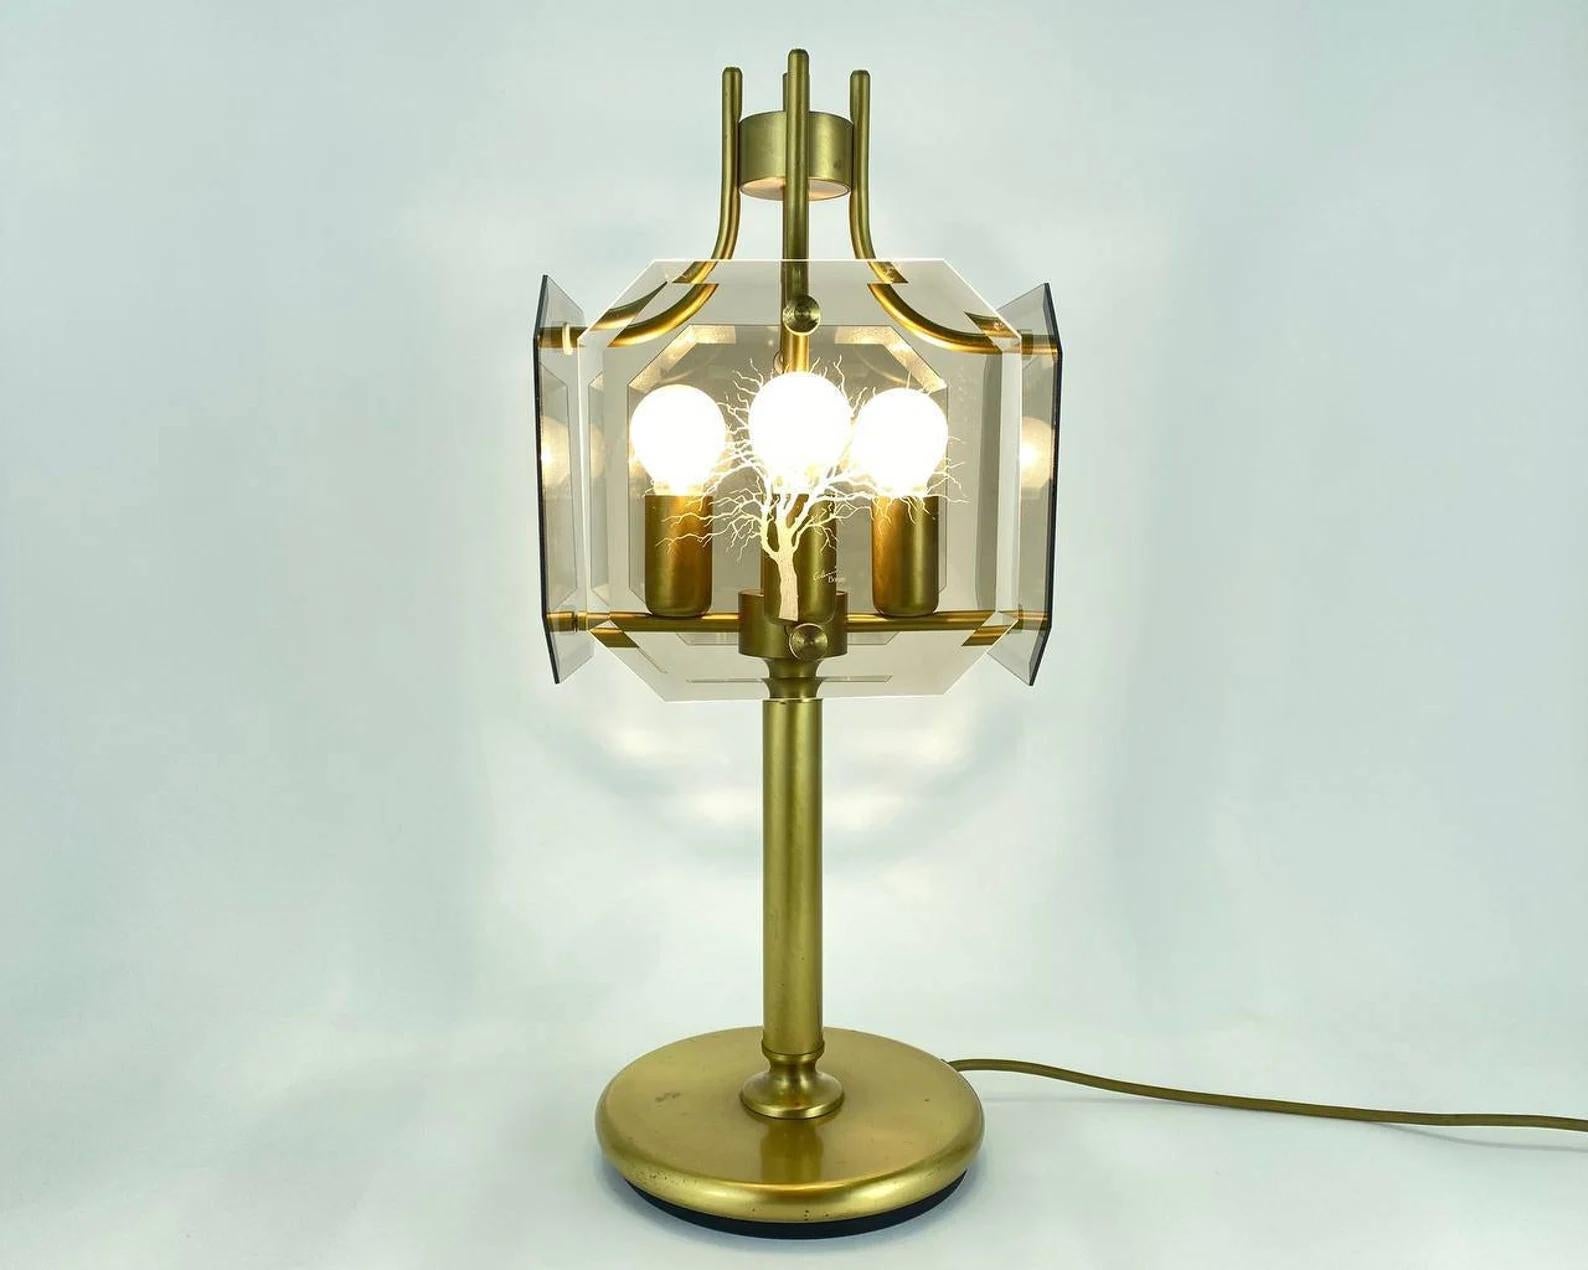 Large table lamp designed by renowned designer Luigi Colani for Sische. Made of brass and smoked glass with decorative engraved trees.

The lamp is signed.

Functional and elegant model will be a worthy addition to the interior.

Designed for